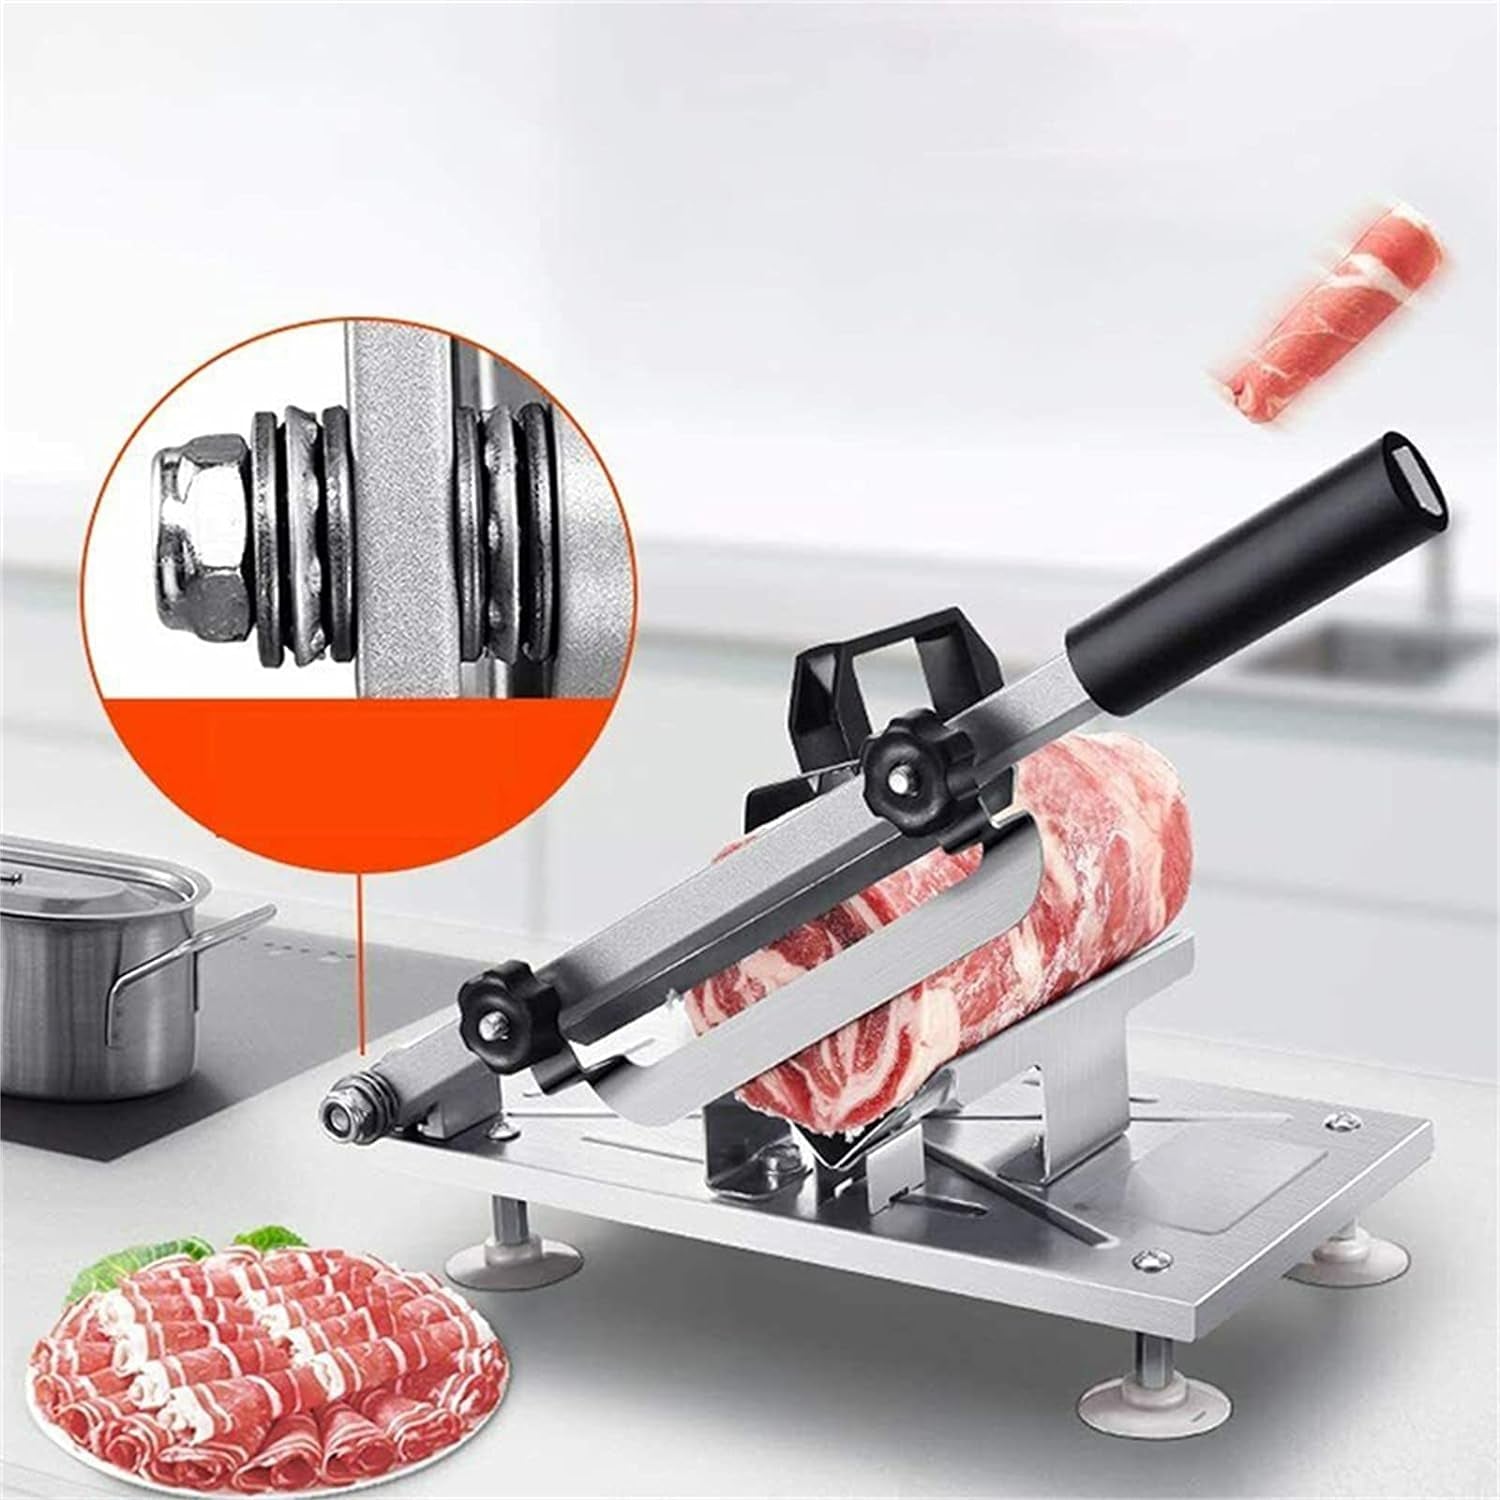 5807 Meat Slicer Beef Slicing Machine Mutton Cutter Stainless Steel | Alloy Steel Blade Stainless Steel Body Anti-Rust Labor-Saving Washable for Beef, Vegetables, Fruits